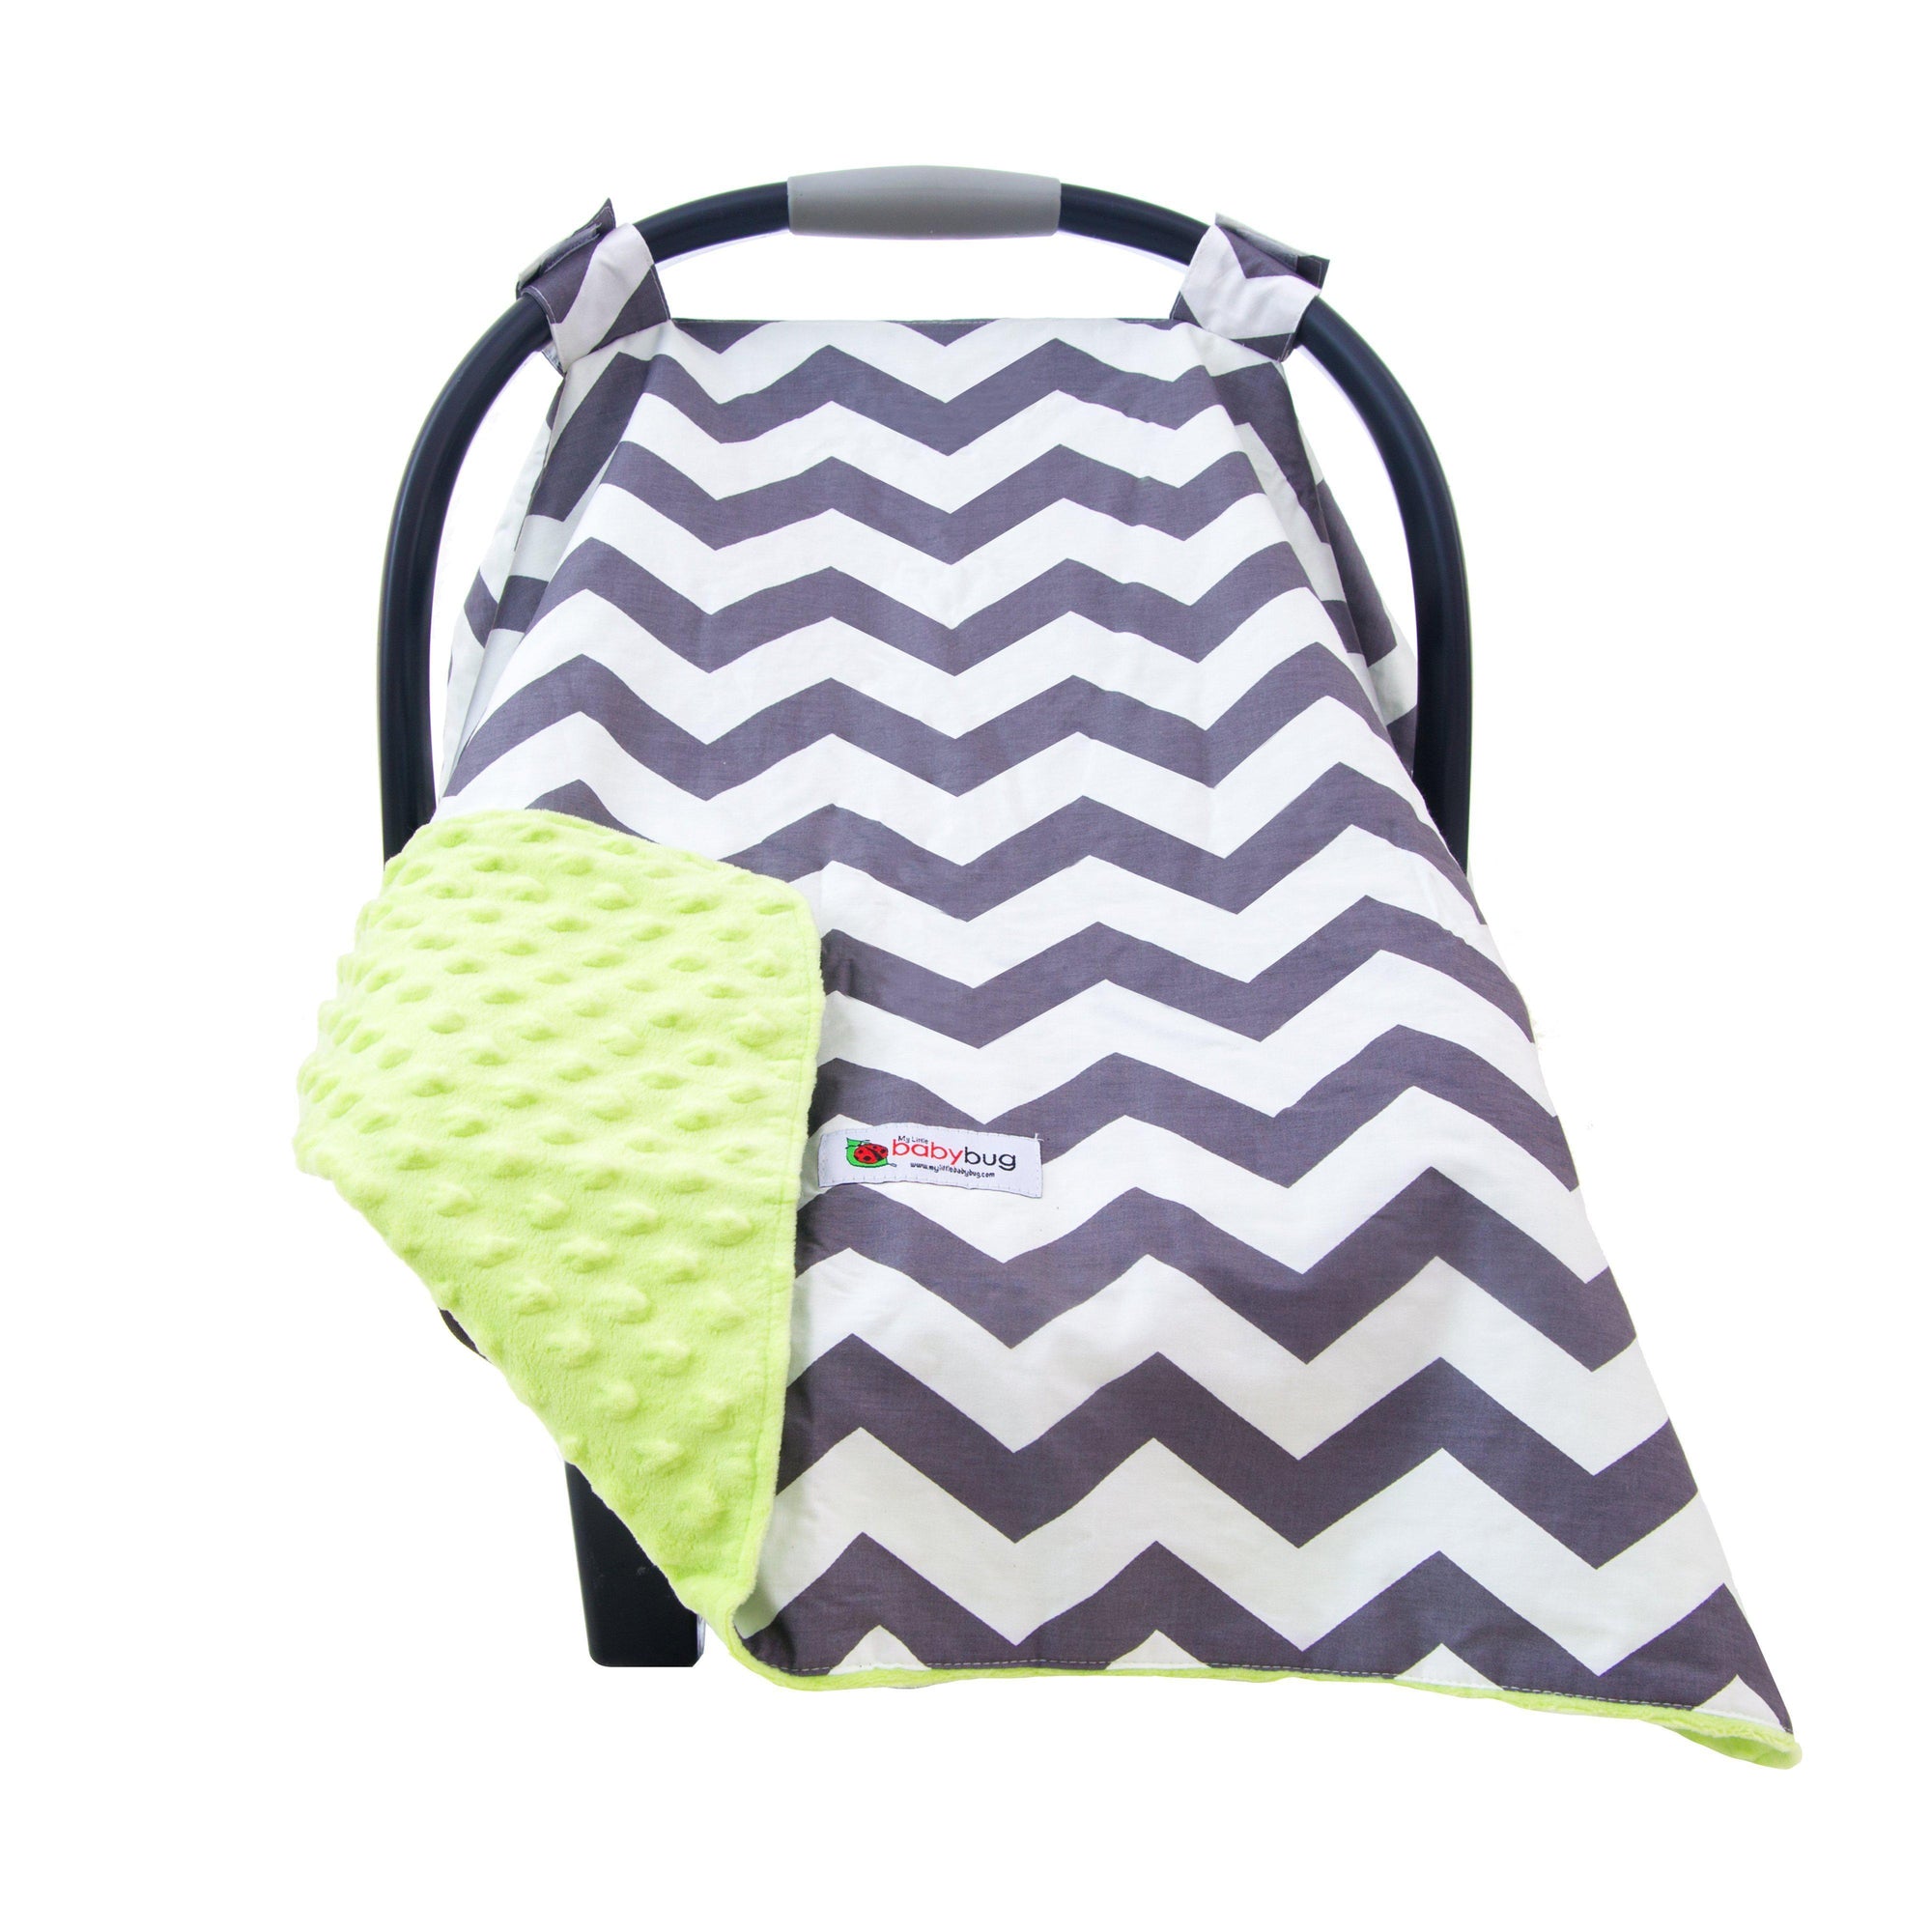 Car Seat Canopy Cover | Andrew Pattern by My Little Baby Bug - My Little Baby Bug